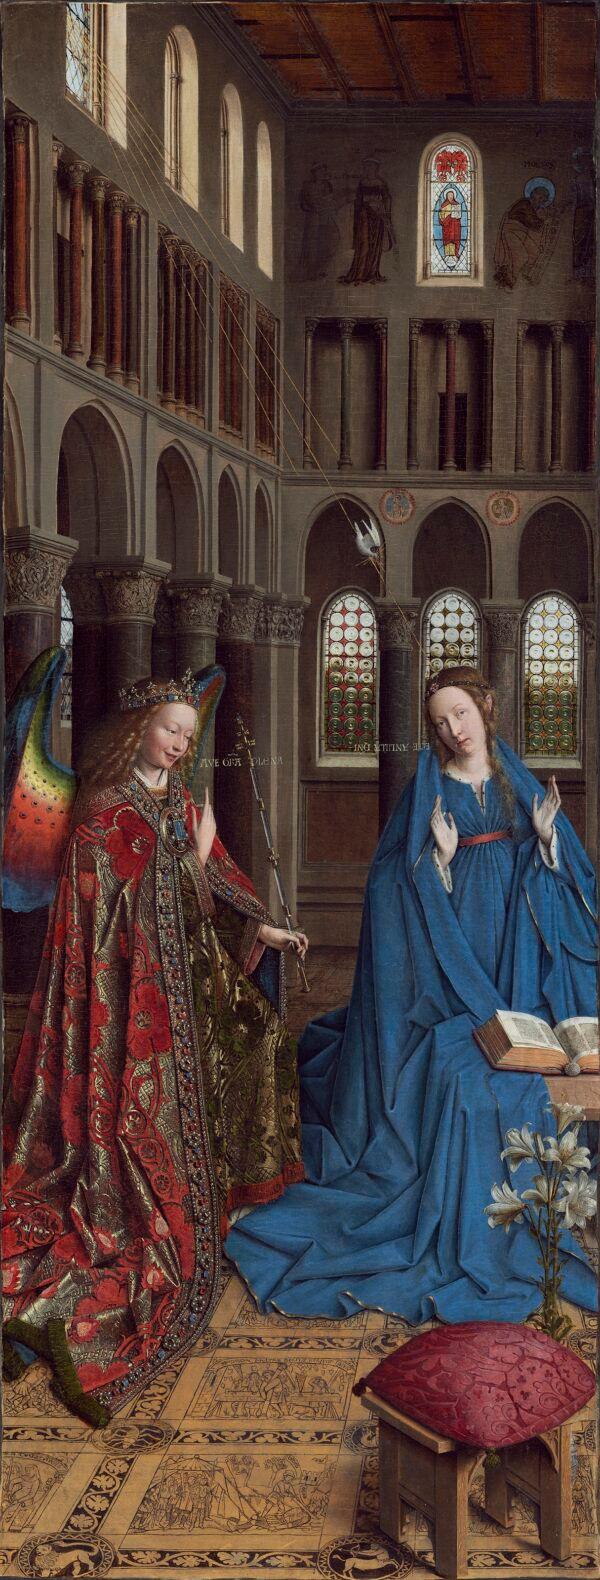 "The Annunciation," circa 1434–1436, by Jan van Eyck. Oil on panel, transferred onto canvas; 36.5 inches by 14.4 inches. Andrew W. Mellon Collection, National Gallery of Art, Washington. (National Gallery of Art, Washington)